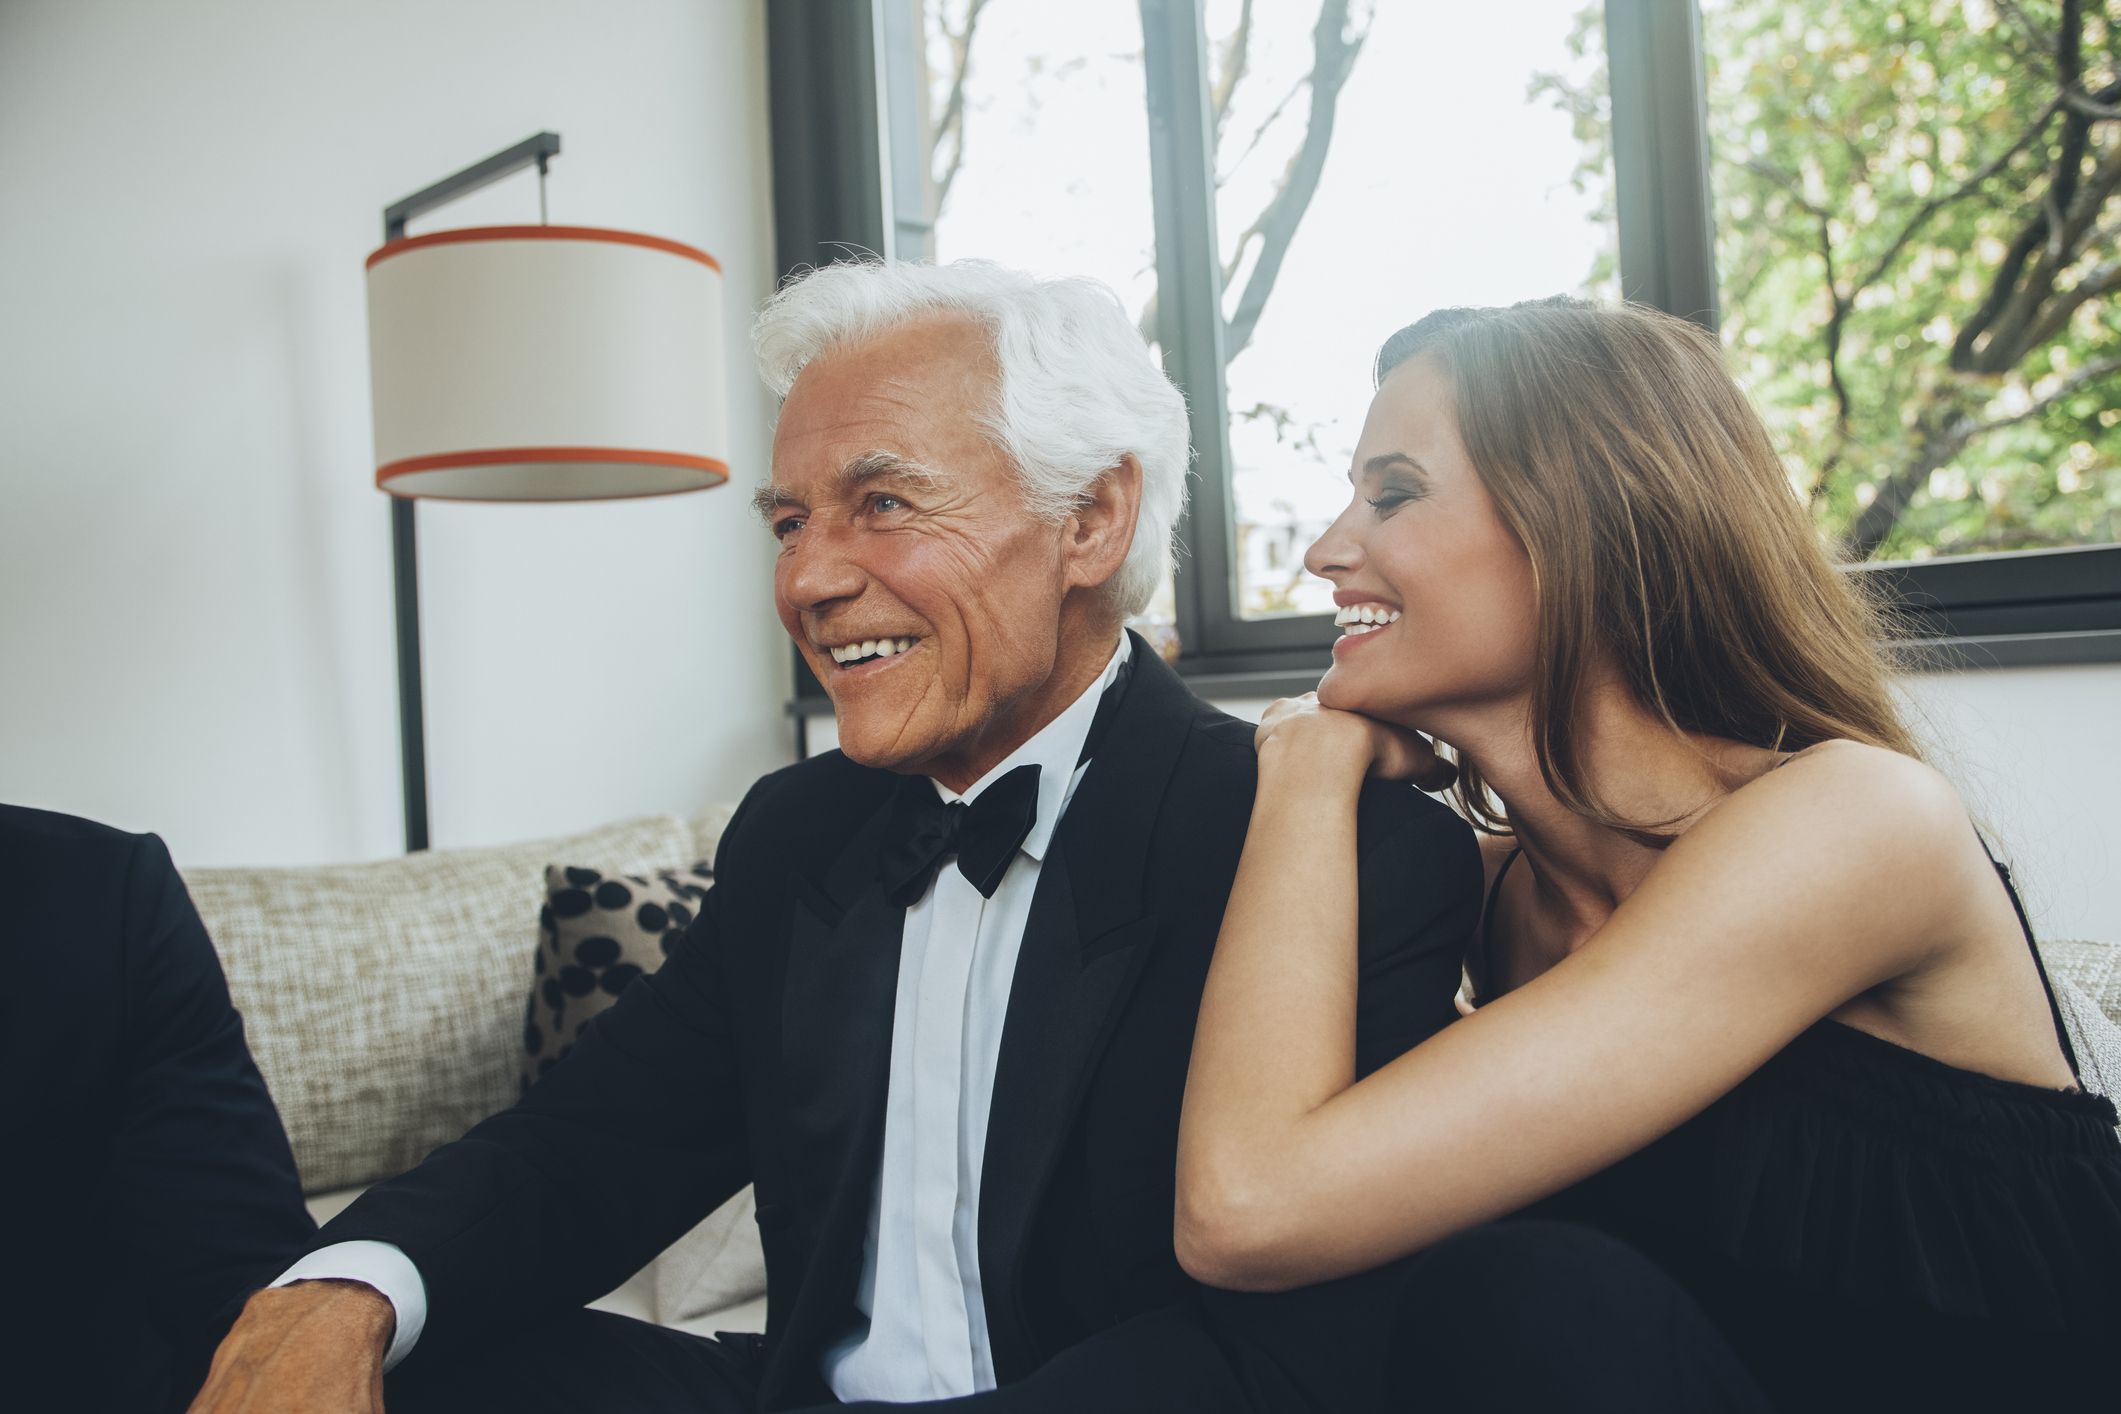 Age gap relationships - What it's like to be with an older man